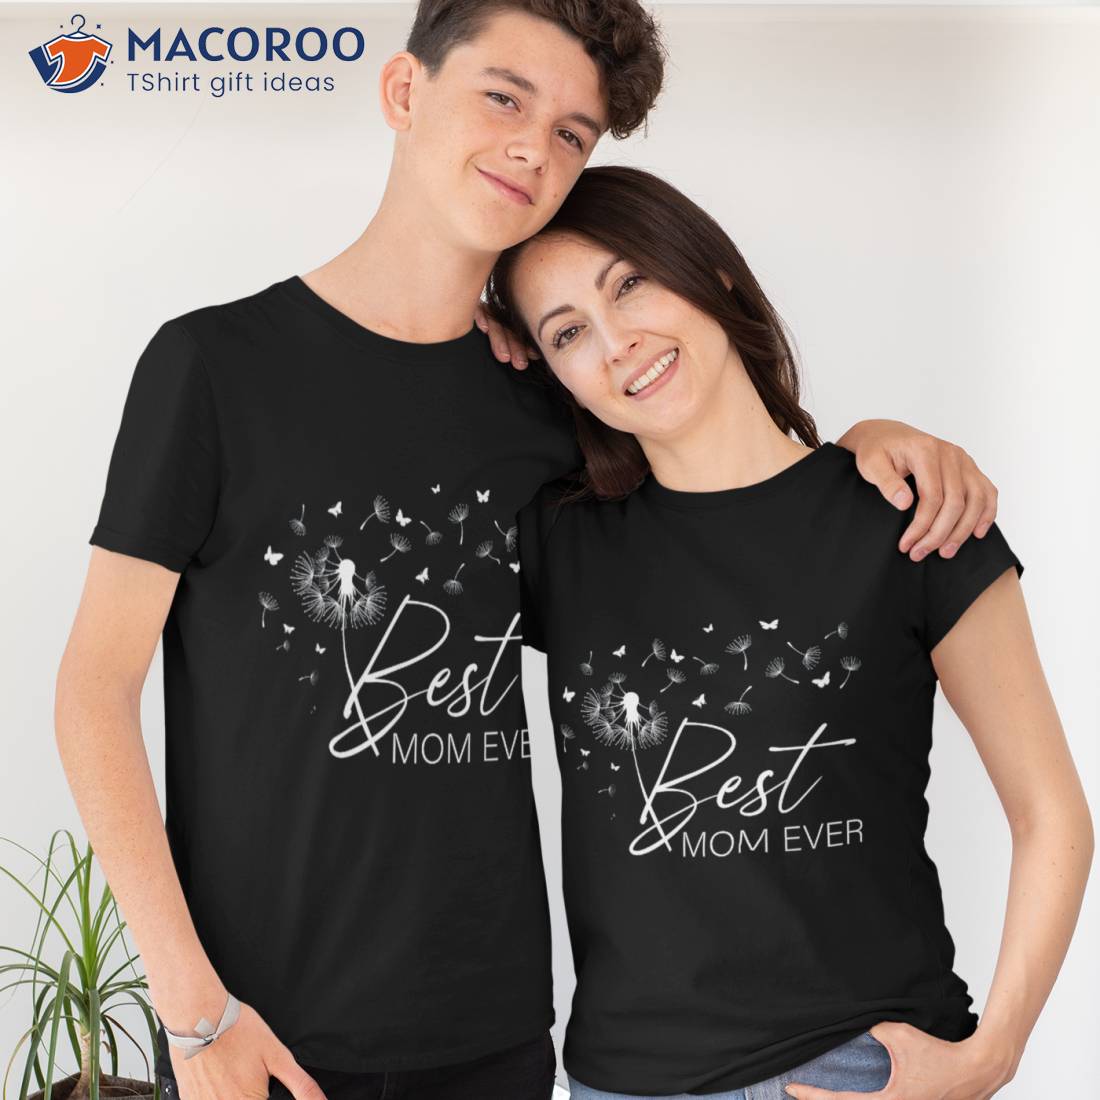 https://images.macoroo.com/wp-content/uploads/2023/05/best-mom-ever-gifts-from-daughter-son-kids-mothers-day-shirt-tshirt.jpg